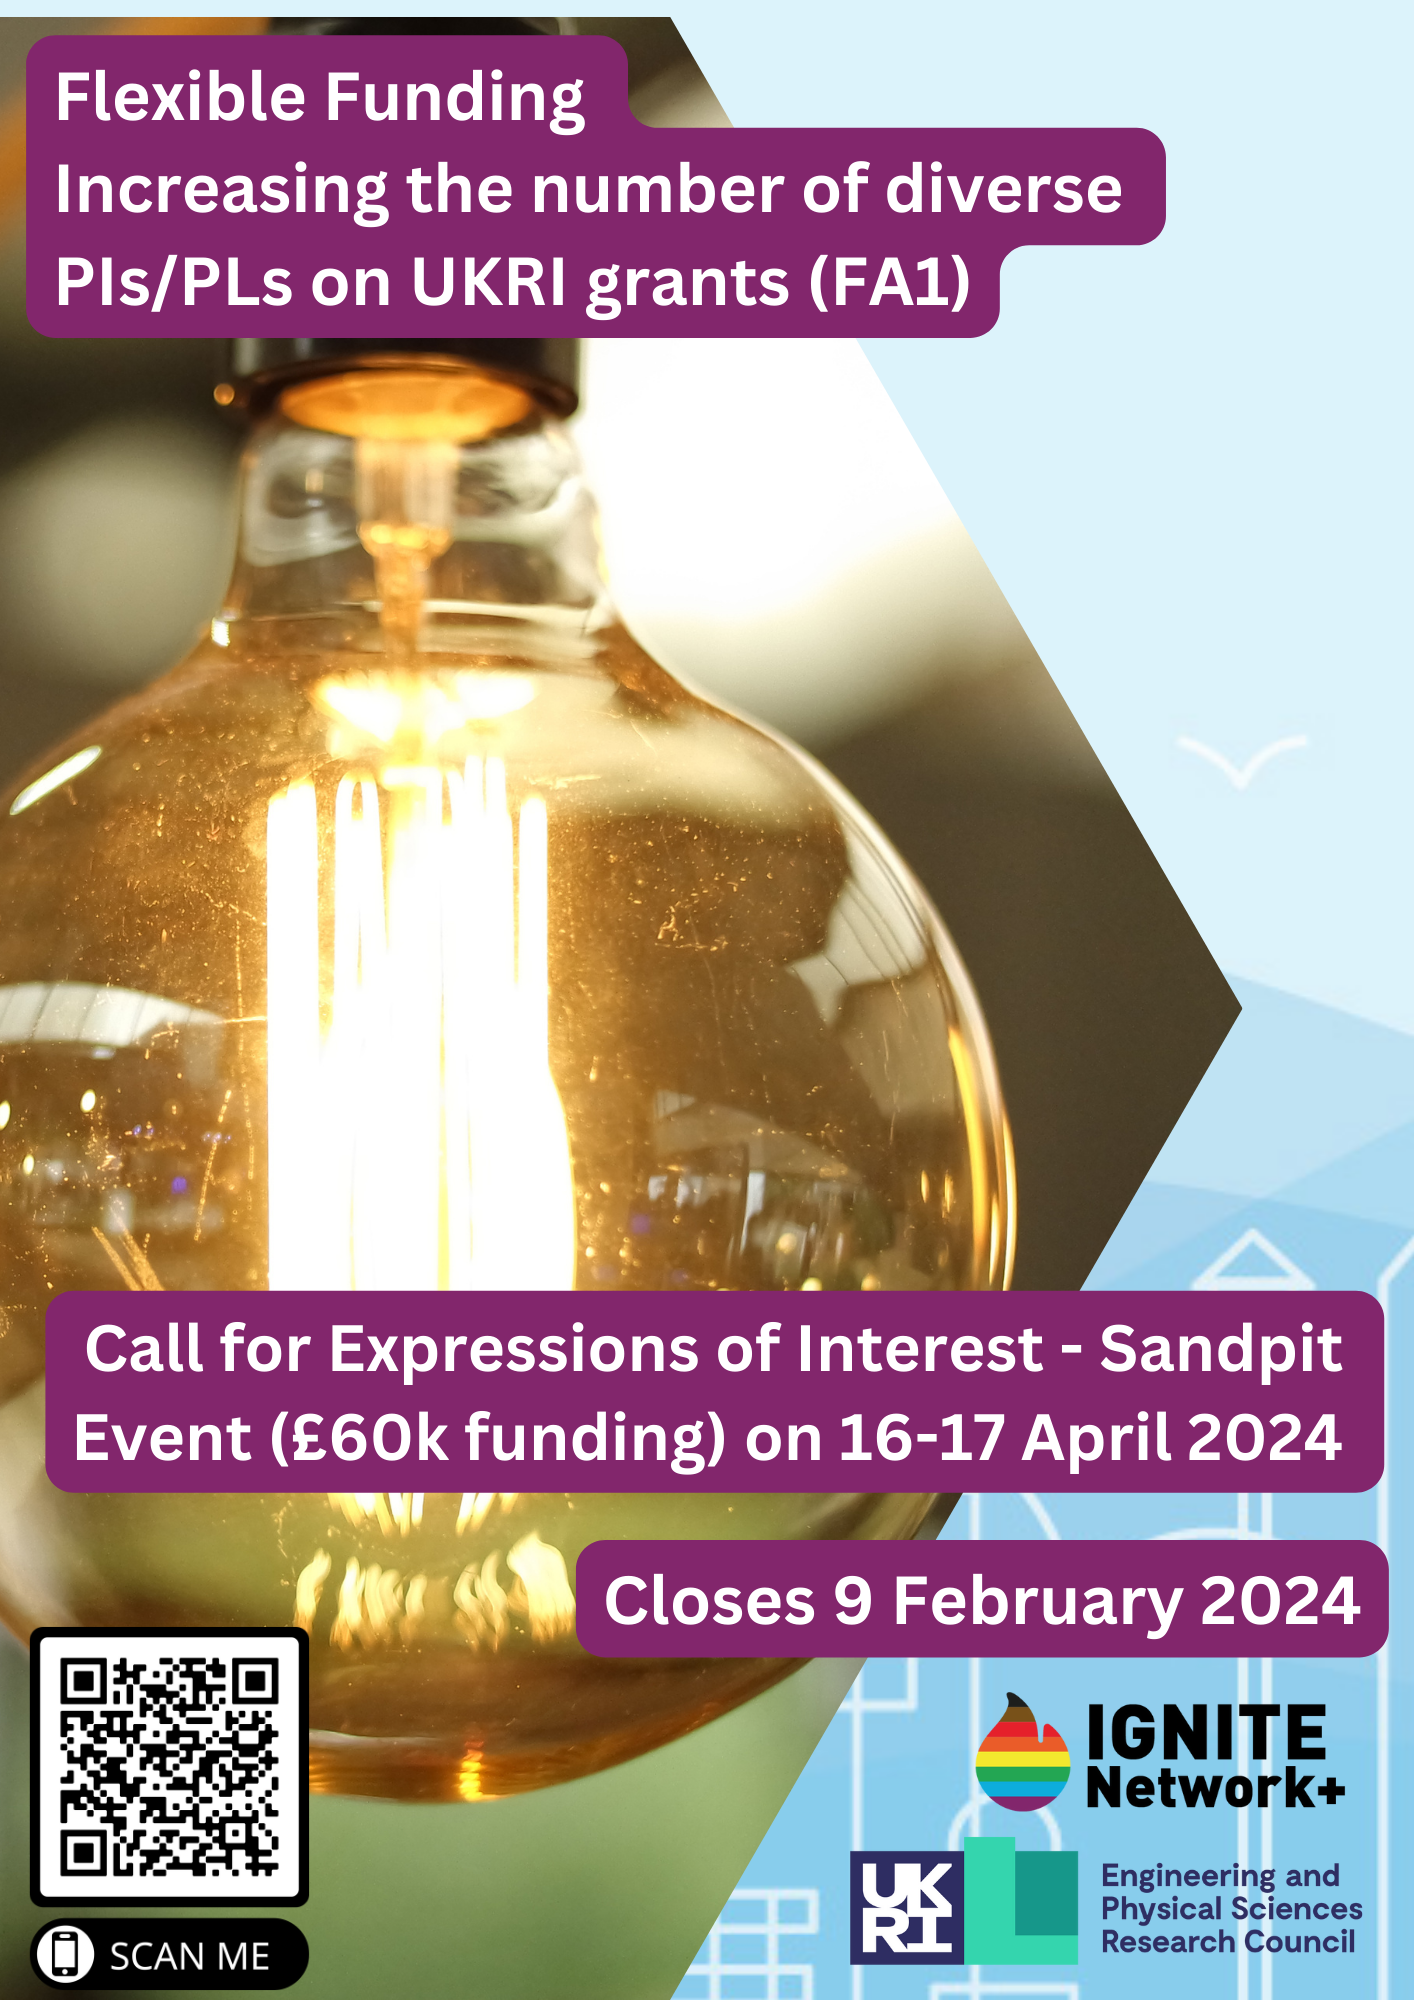 Flexible Funding Increasing the number of diverse PIs/PLs on UKRI grants (FA1) Call for Expressions of Interest to attend a Sandpit Event 16 and 17 April 2024. Closes 9 February 2024